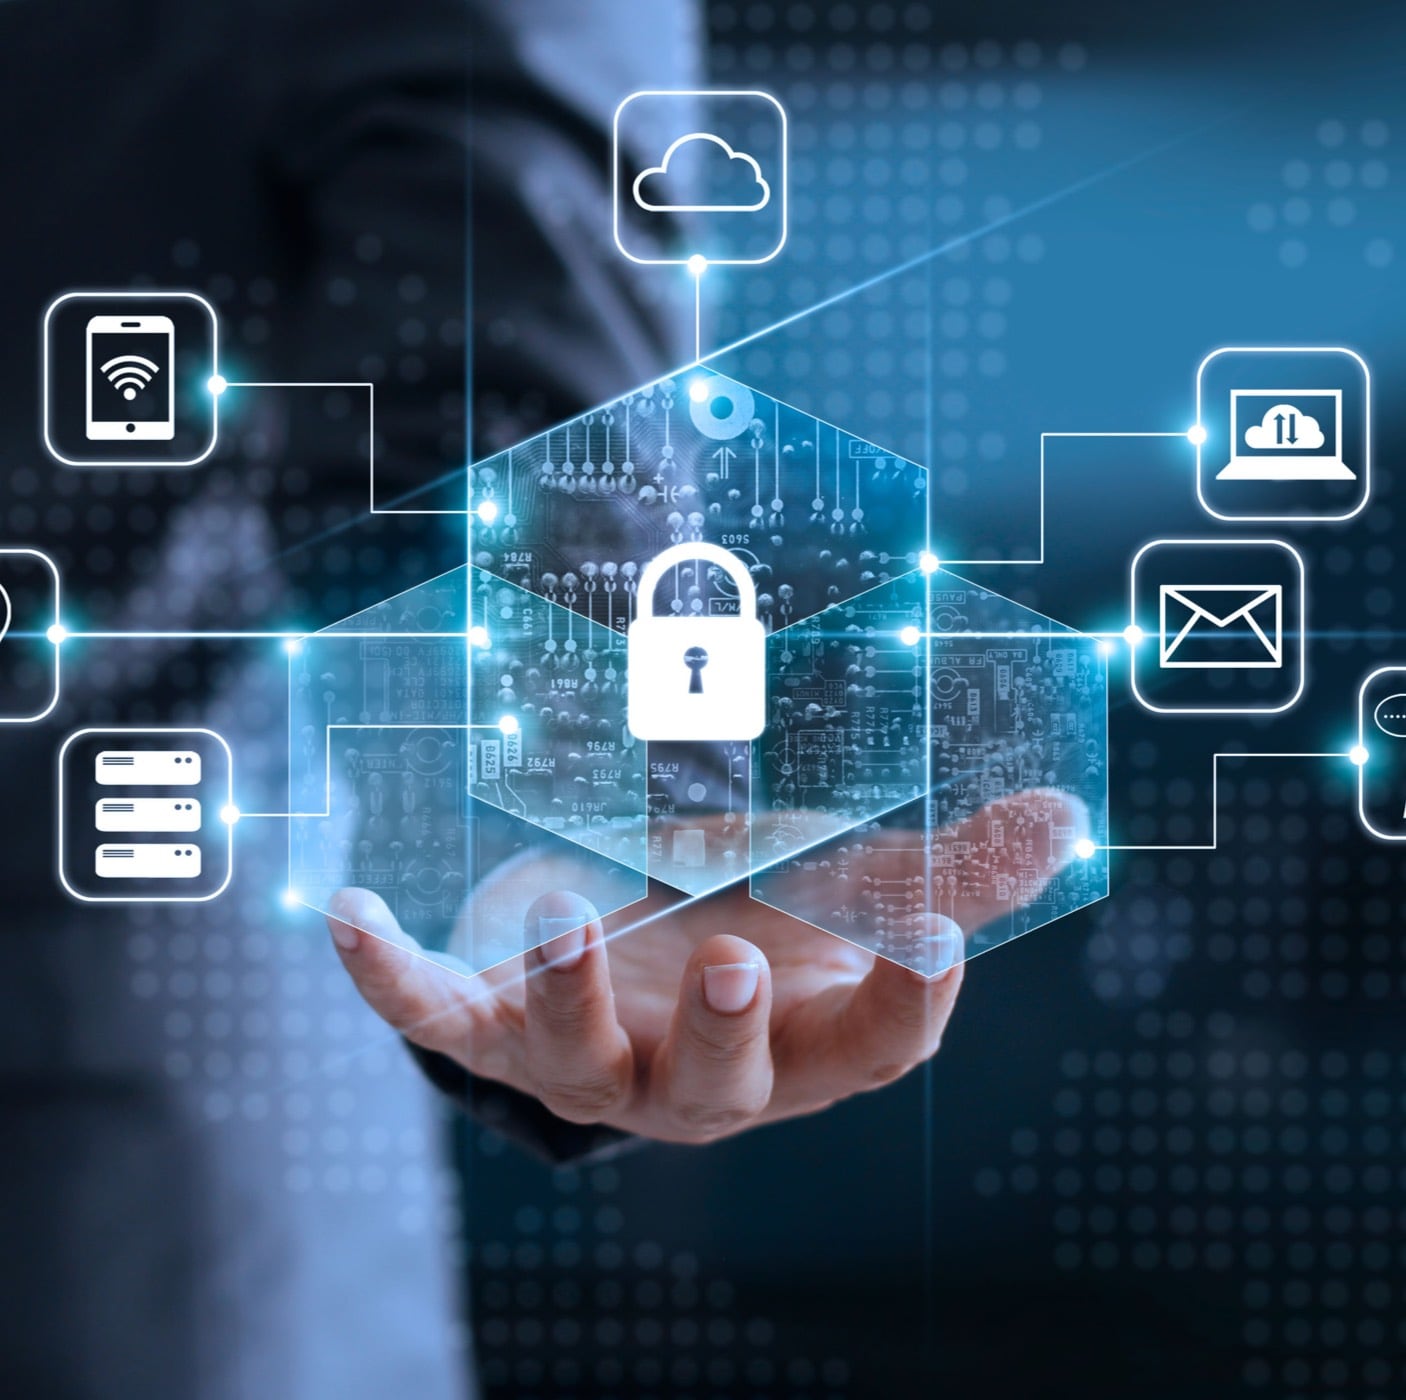 INFORMATION SECURITY, DATA PROTECTION AND THE CLOUD